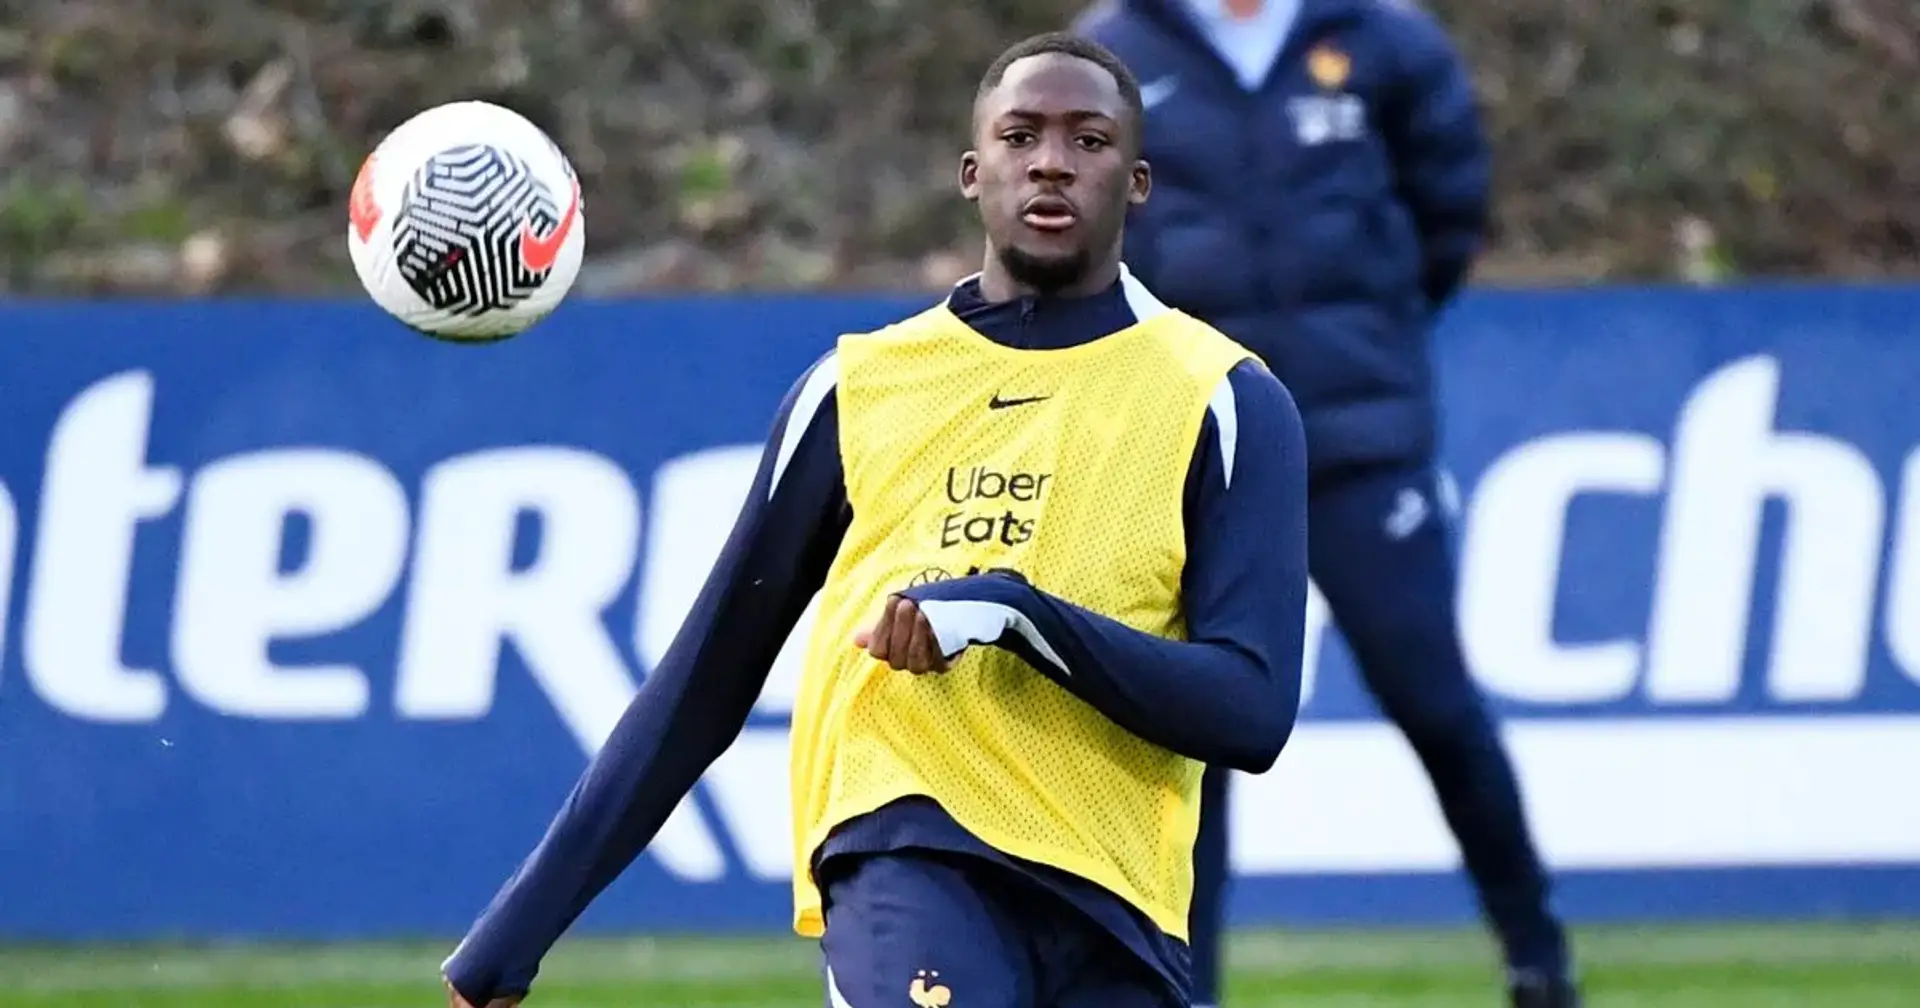 Ibrahima Konate likely to start in France friendly — he missed 3 Liverpool game due to injury